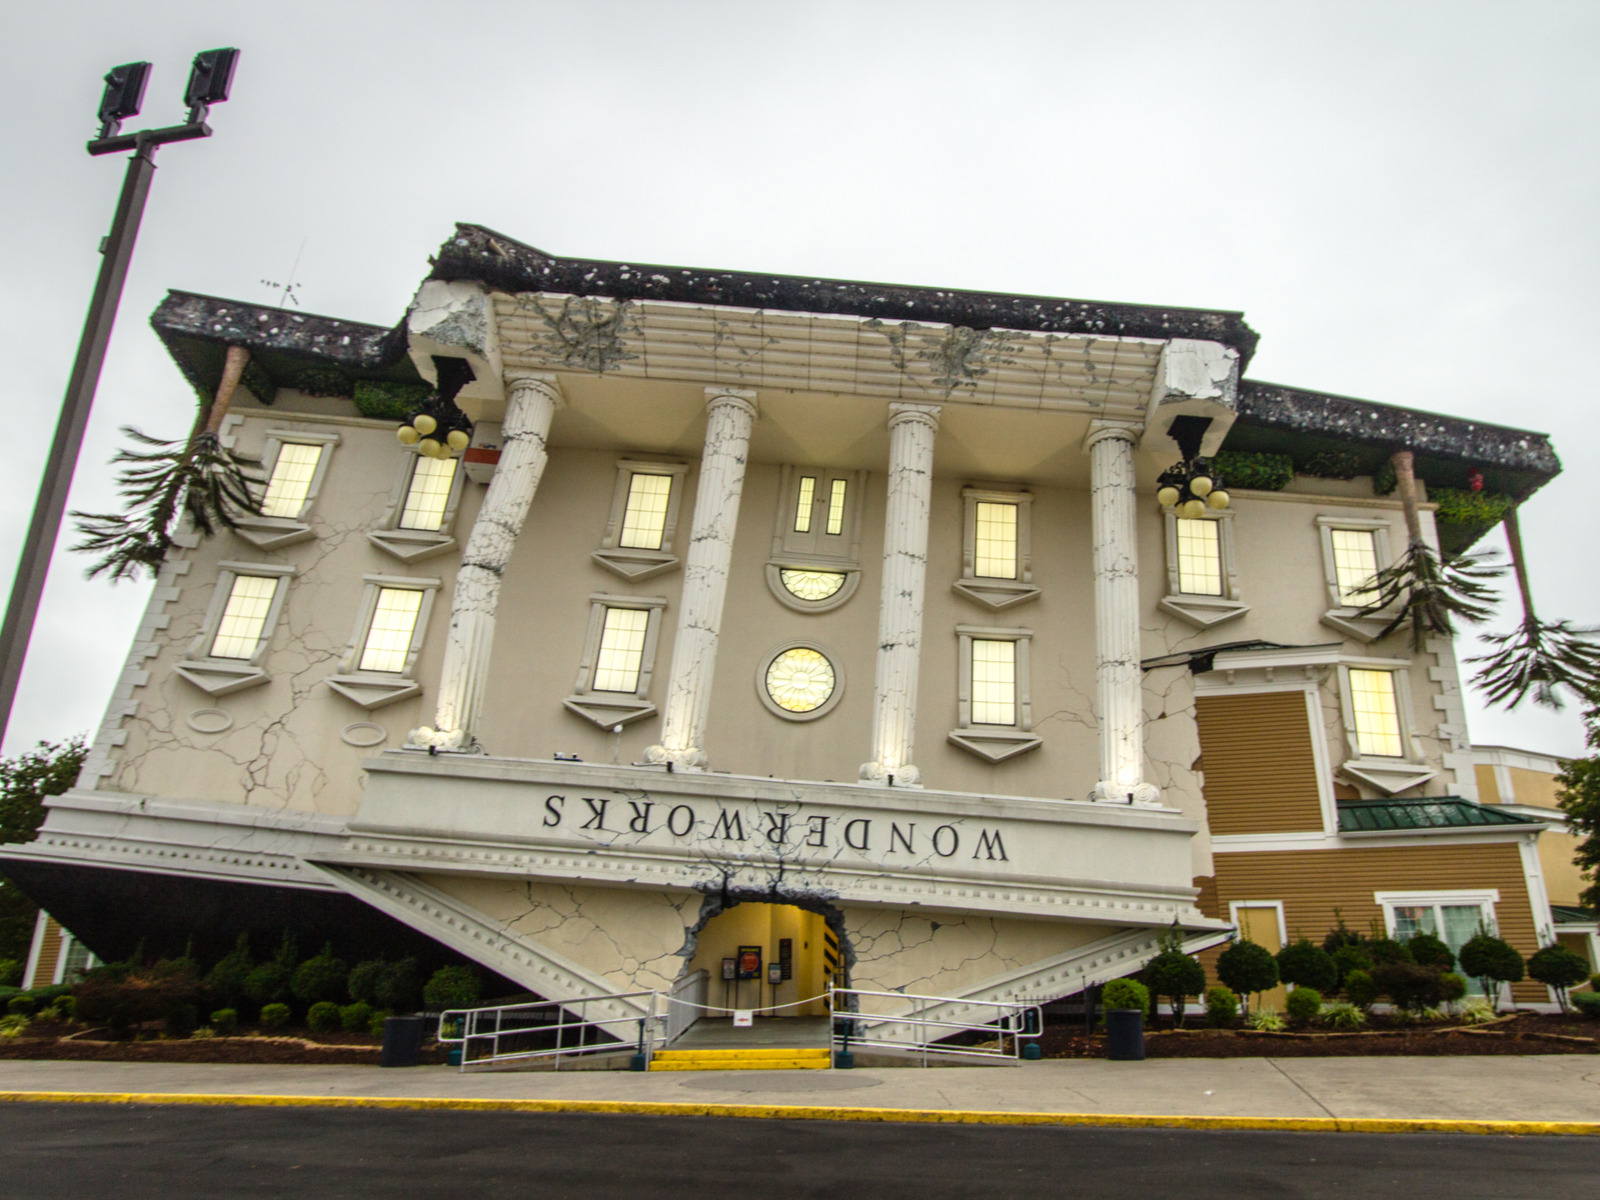 wonderworks, a mind-bending upside-down museum with four front columns and one of the best things to do in pigeon forge